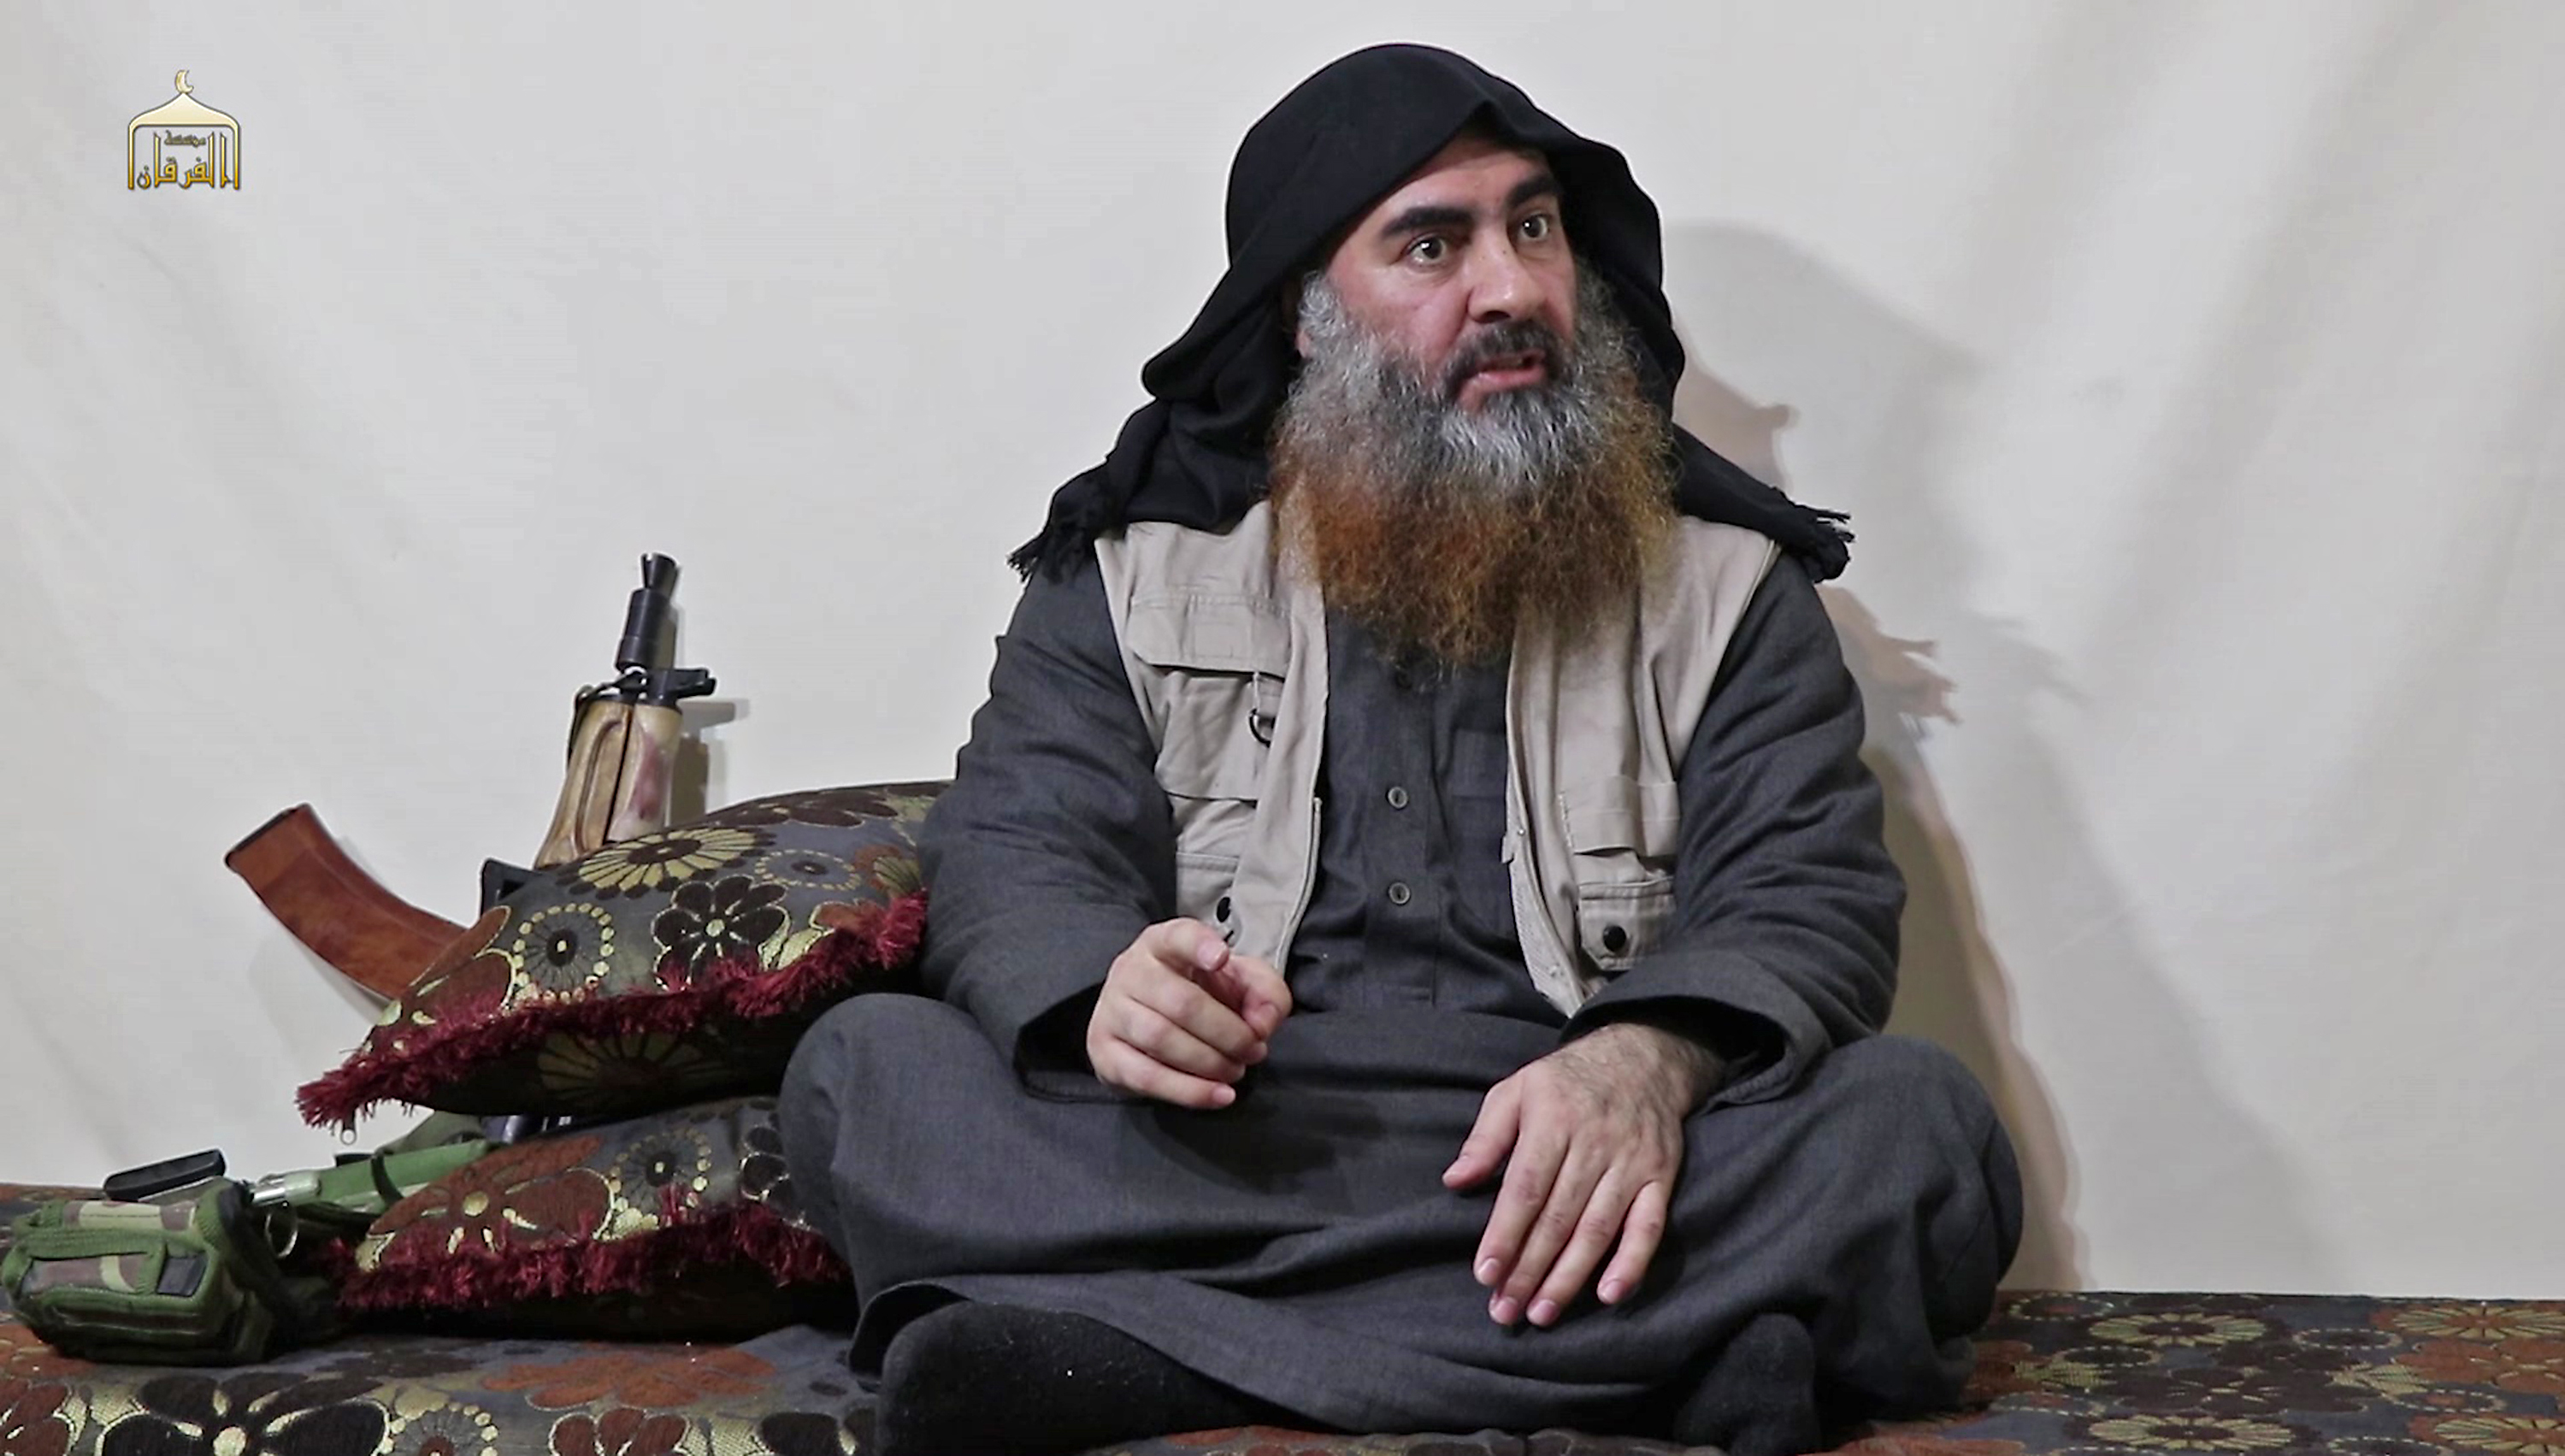 Baghdadi on video in his last public appearance (Reuters)